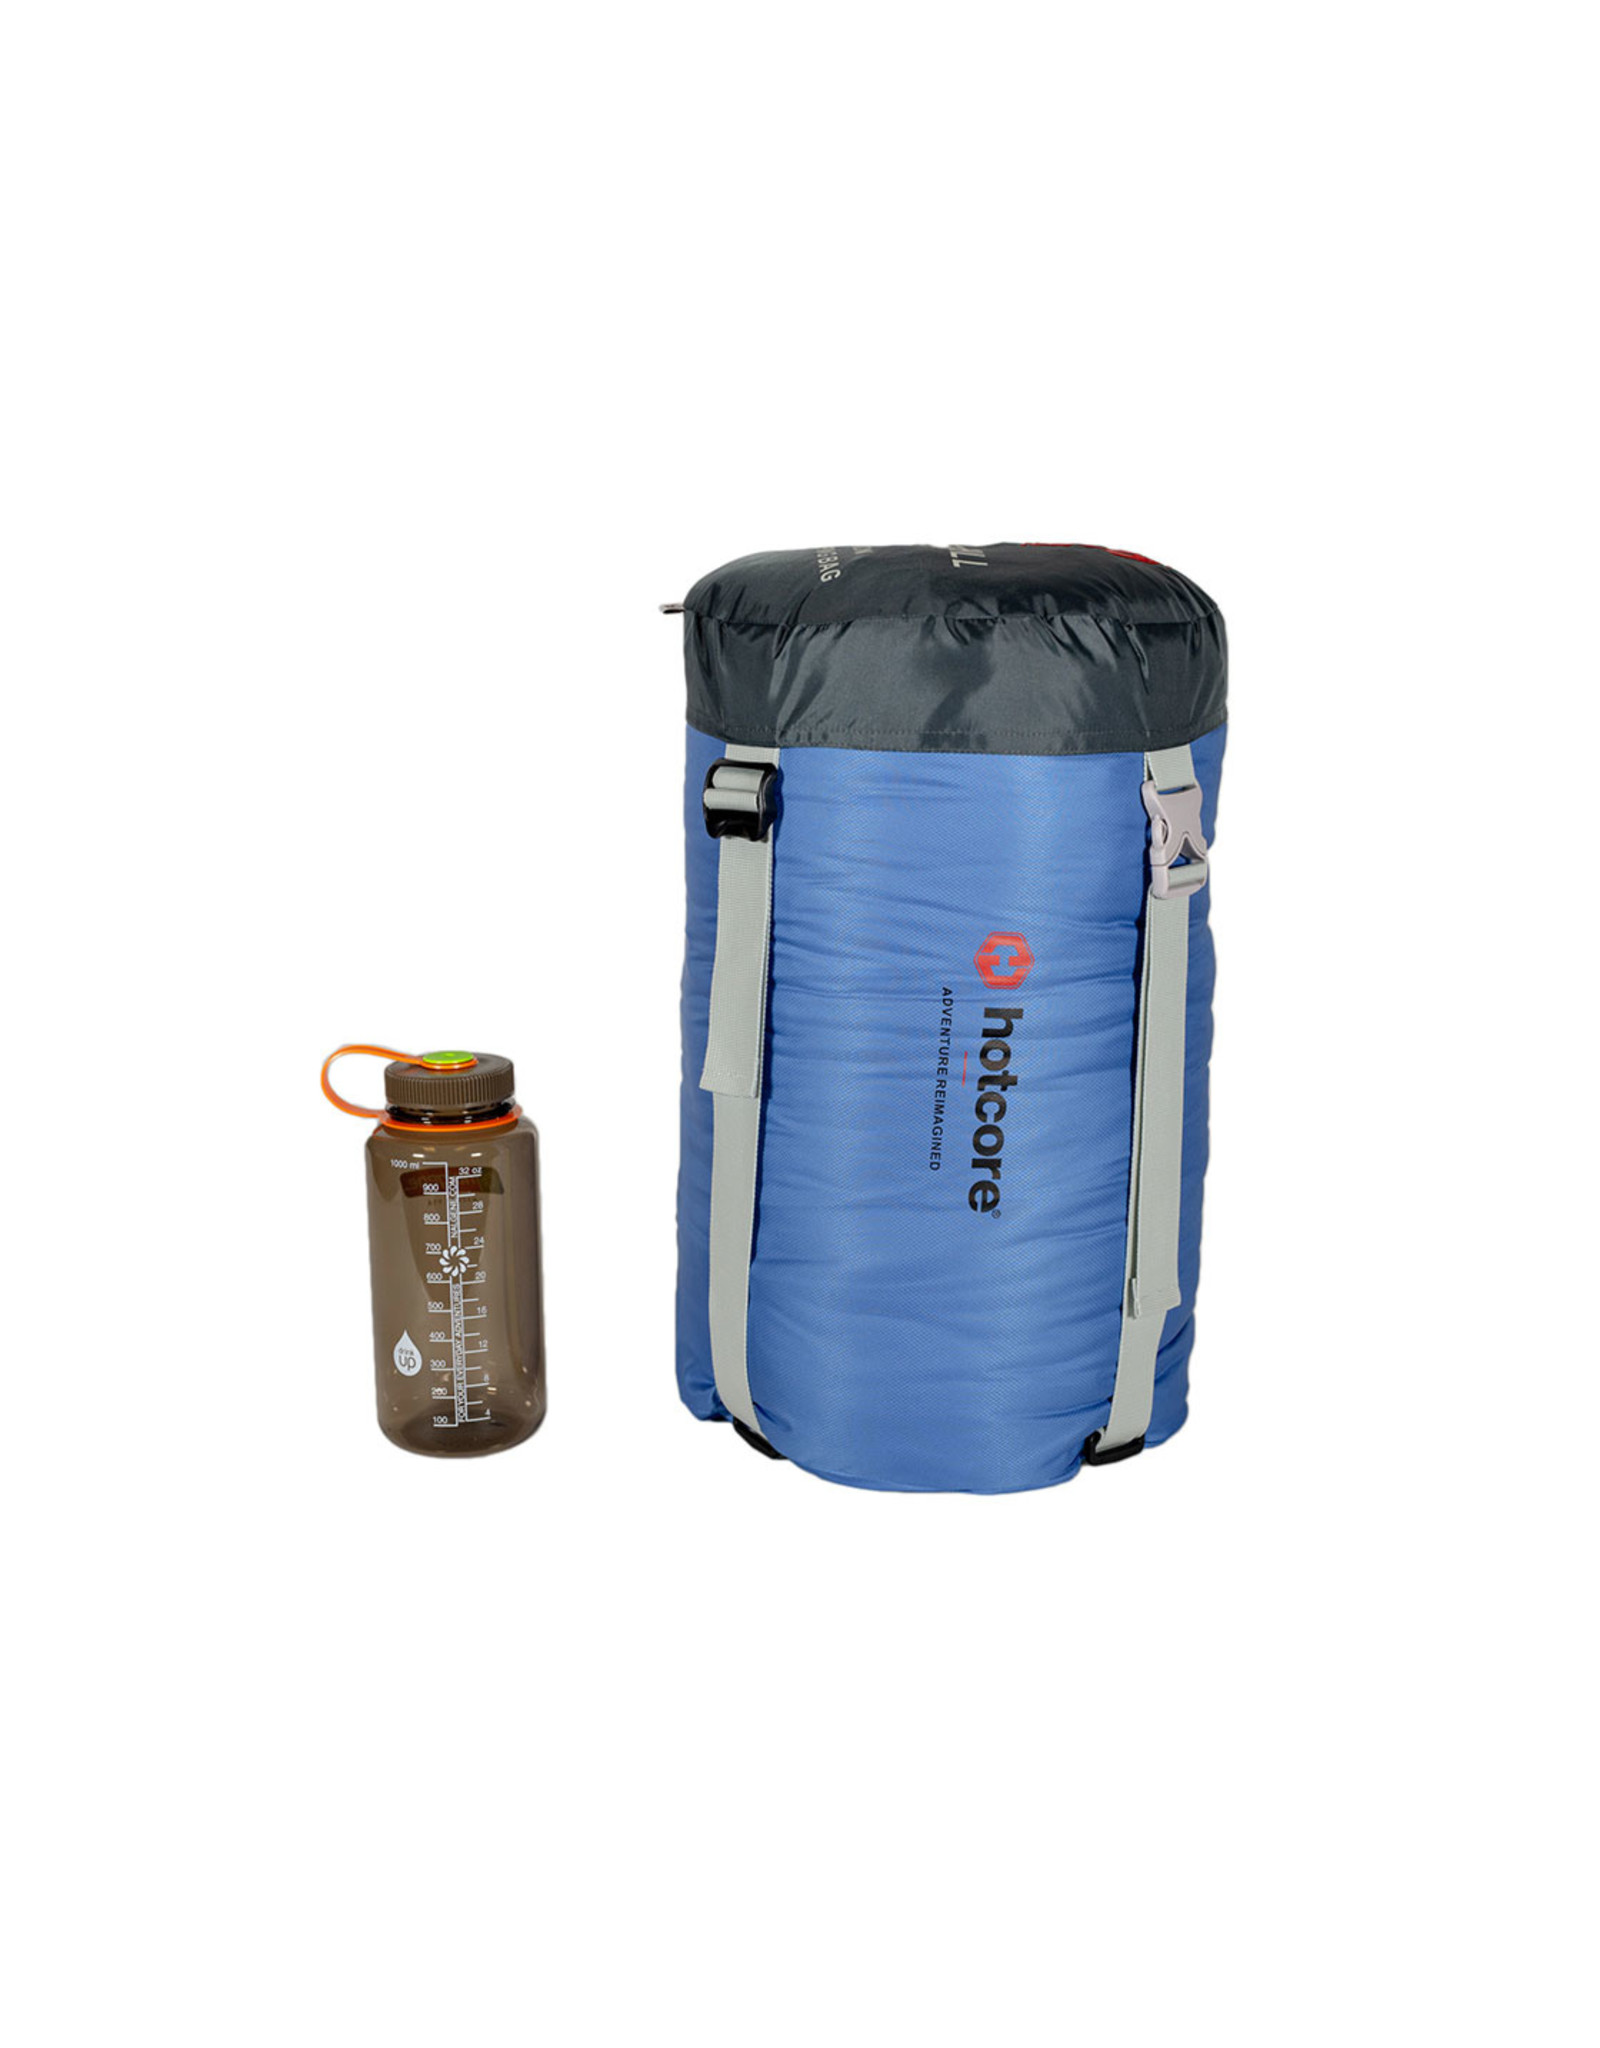 HOTCORE BLUEBERRY HILL (DOUBLE WIDE) SLEEPING BAG